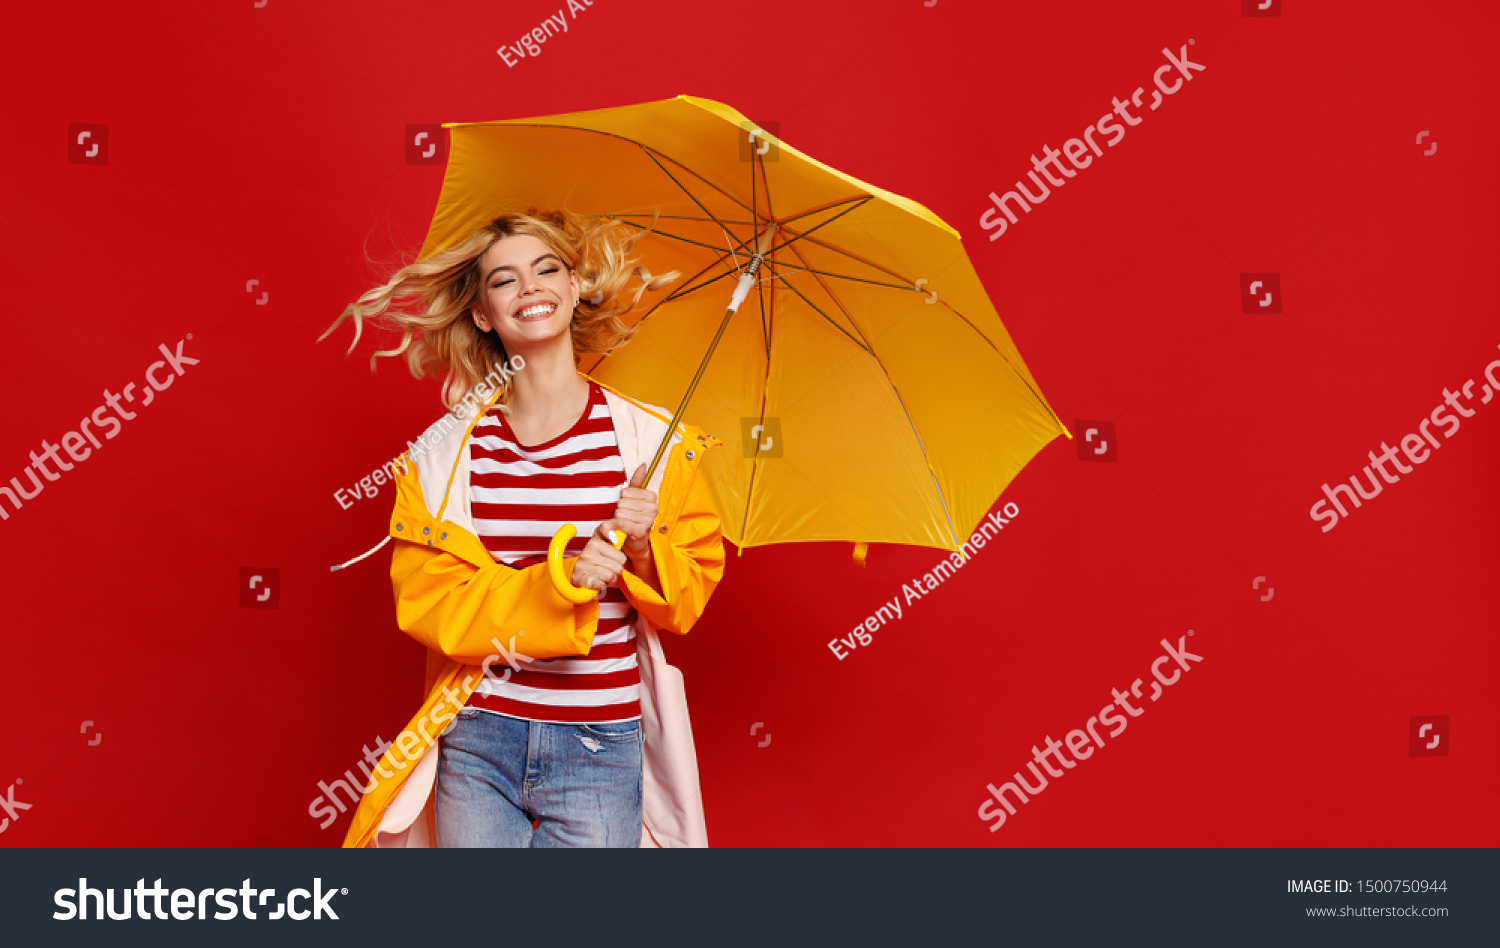 young happy emotional cheerful girl laughing and jumping with yellow umbrella   on colored red background
 #1500750944